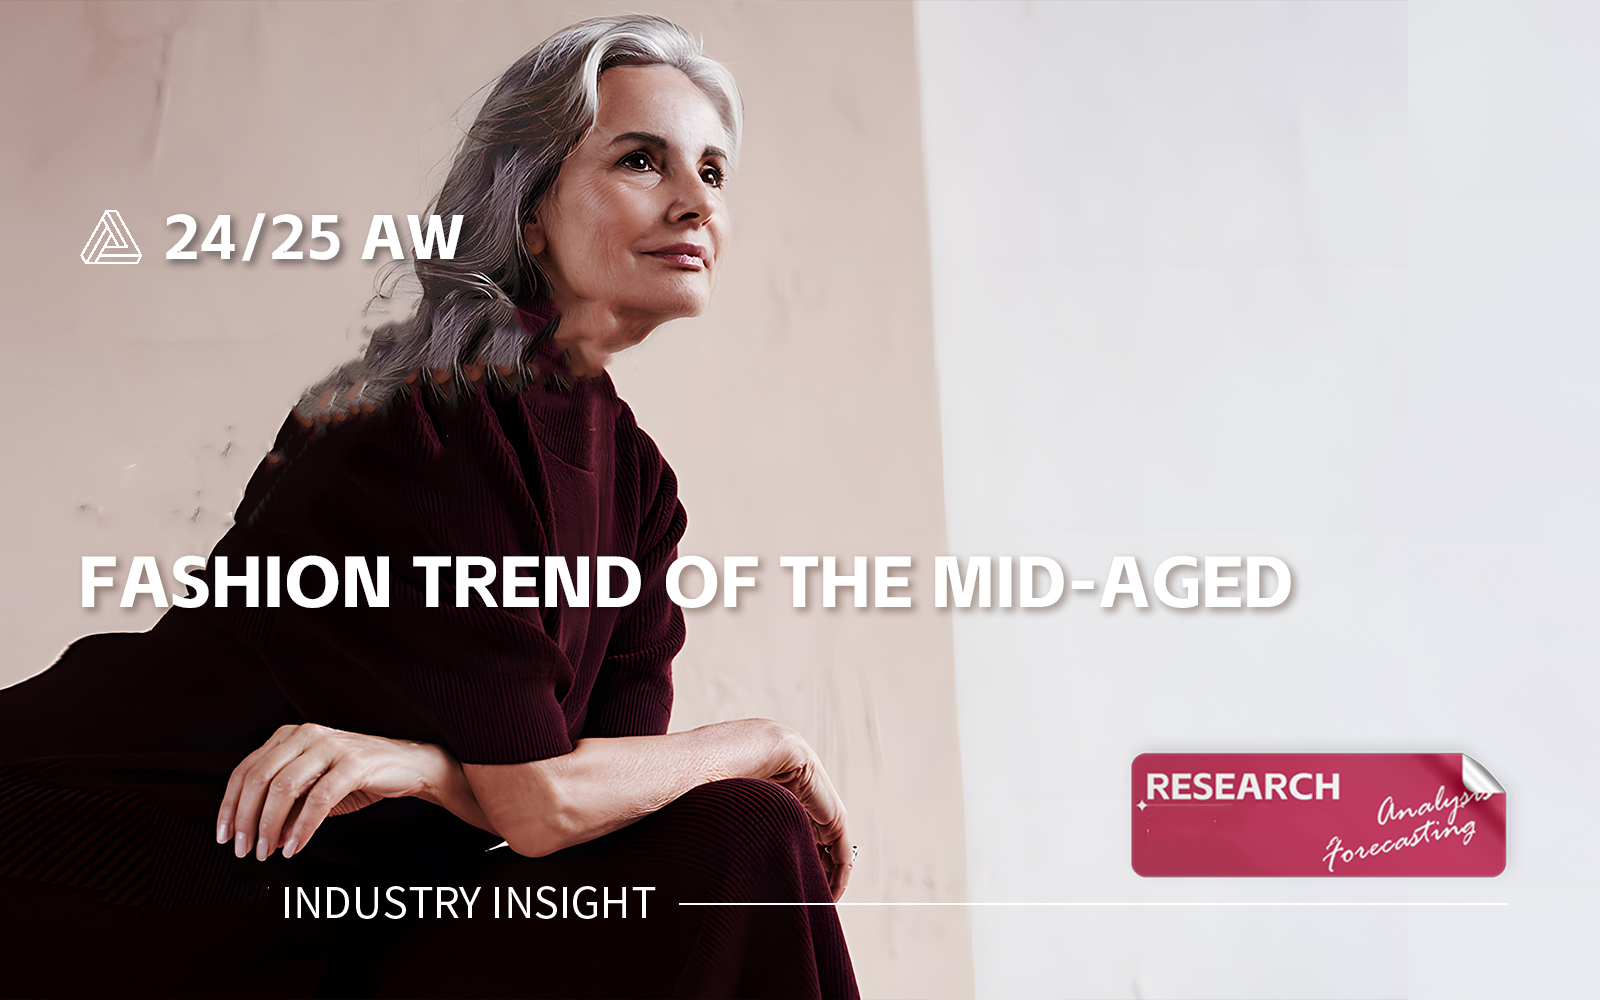 The Industry Insight of Mid-aged Fashion